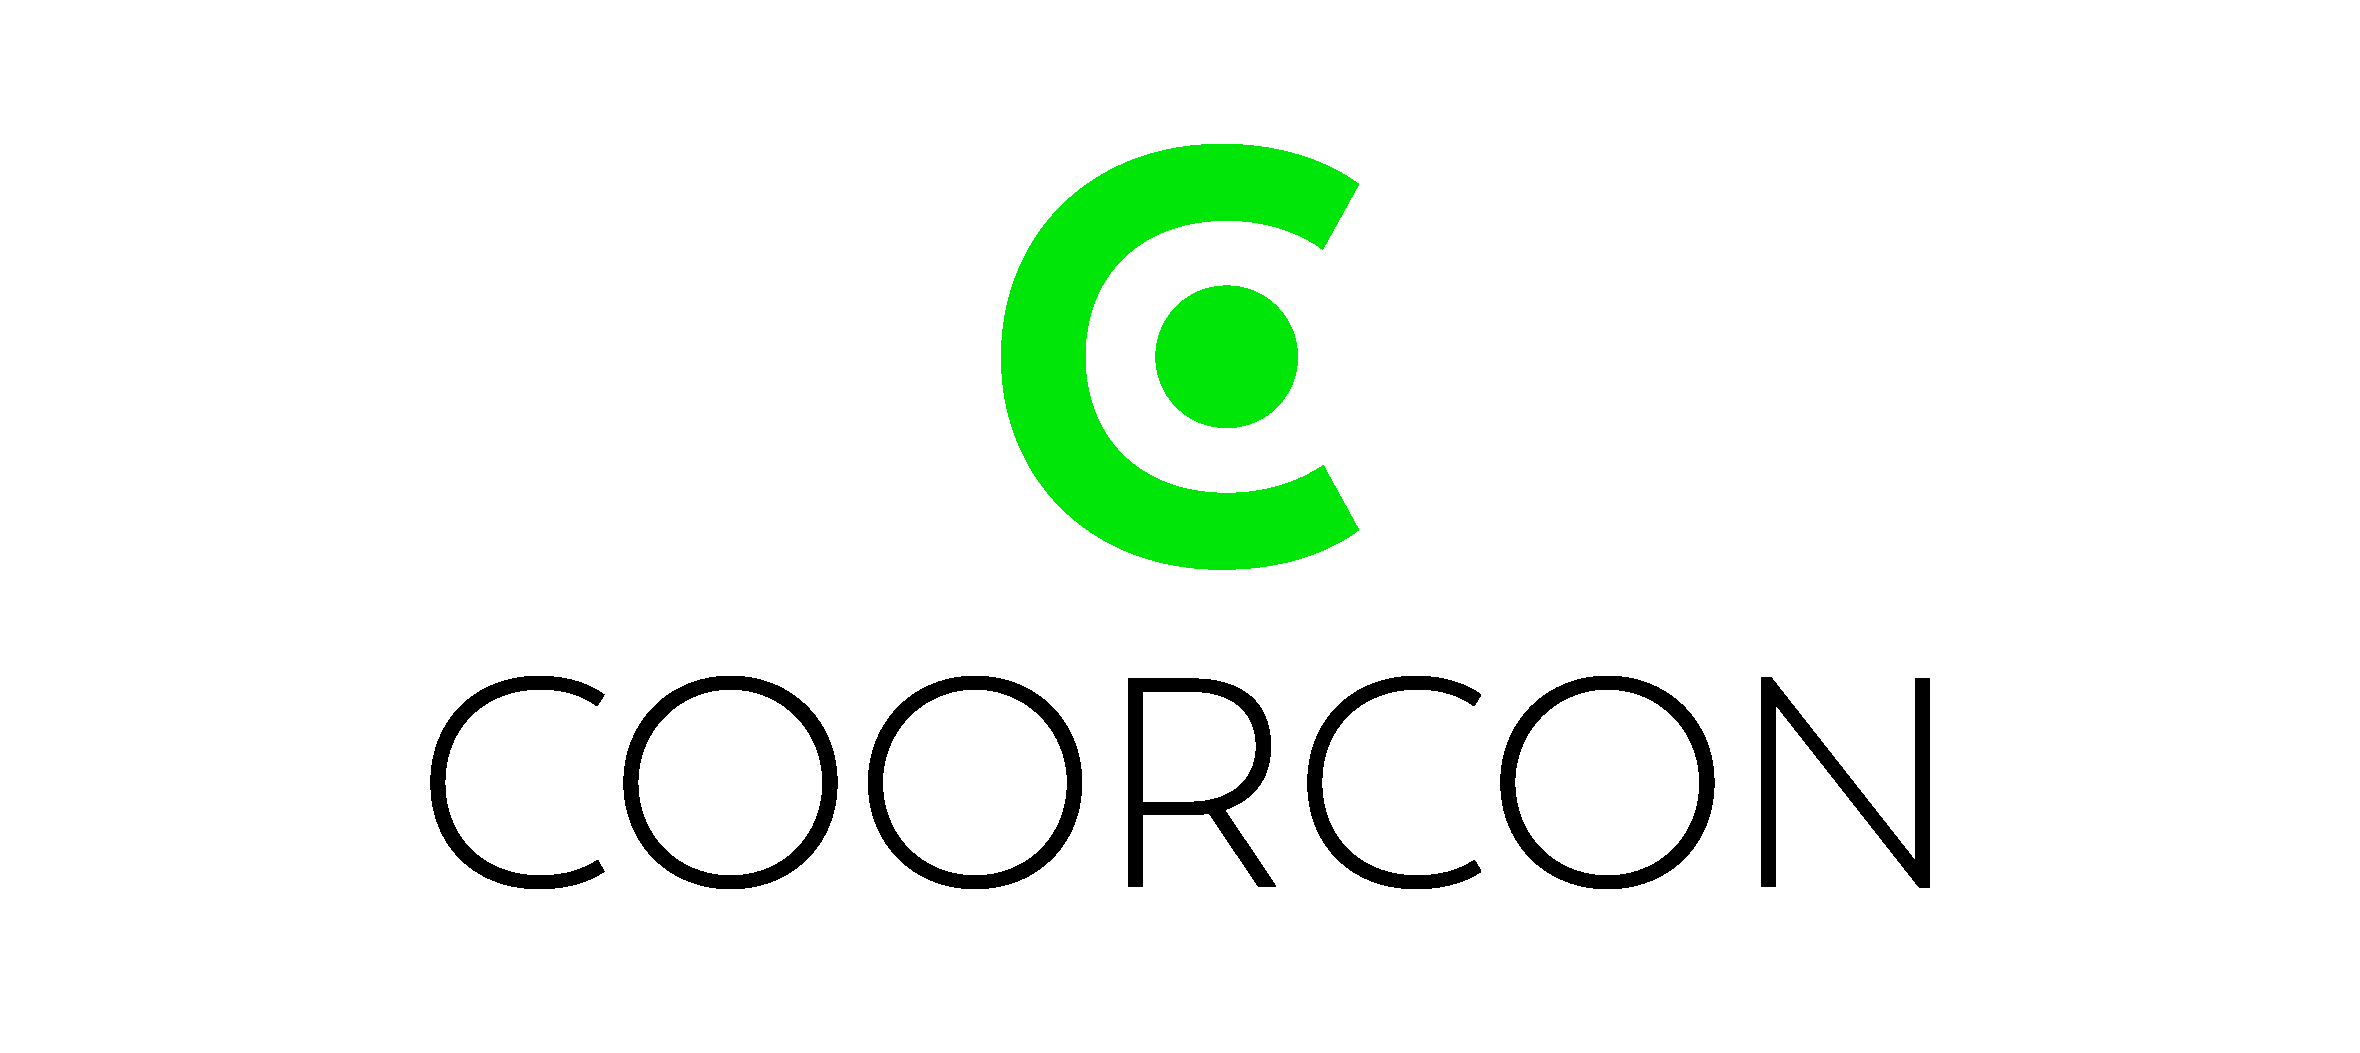 Coorcon